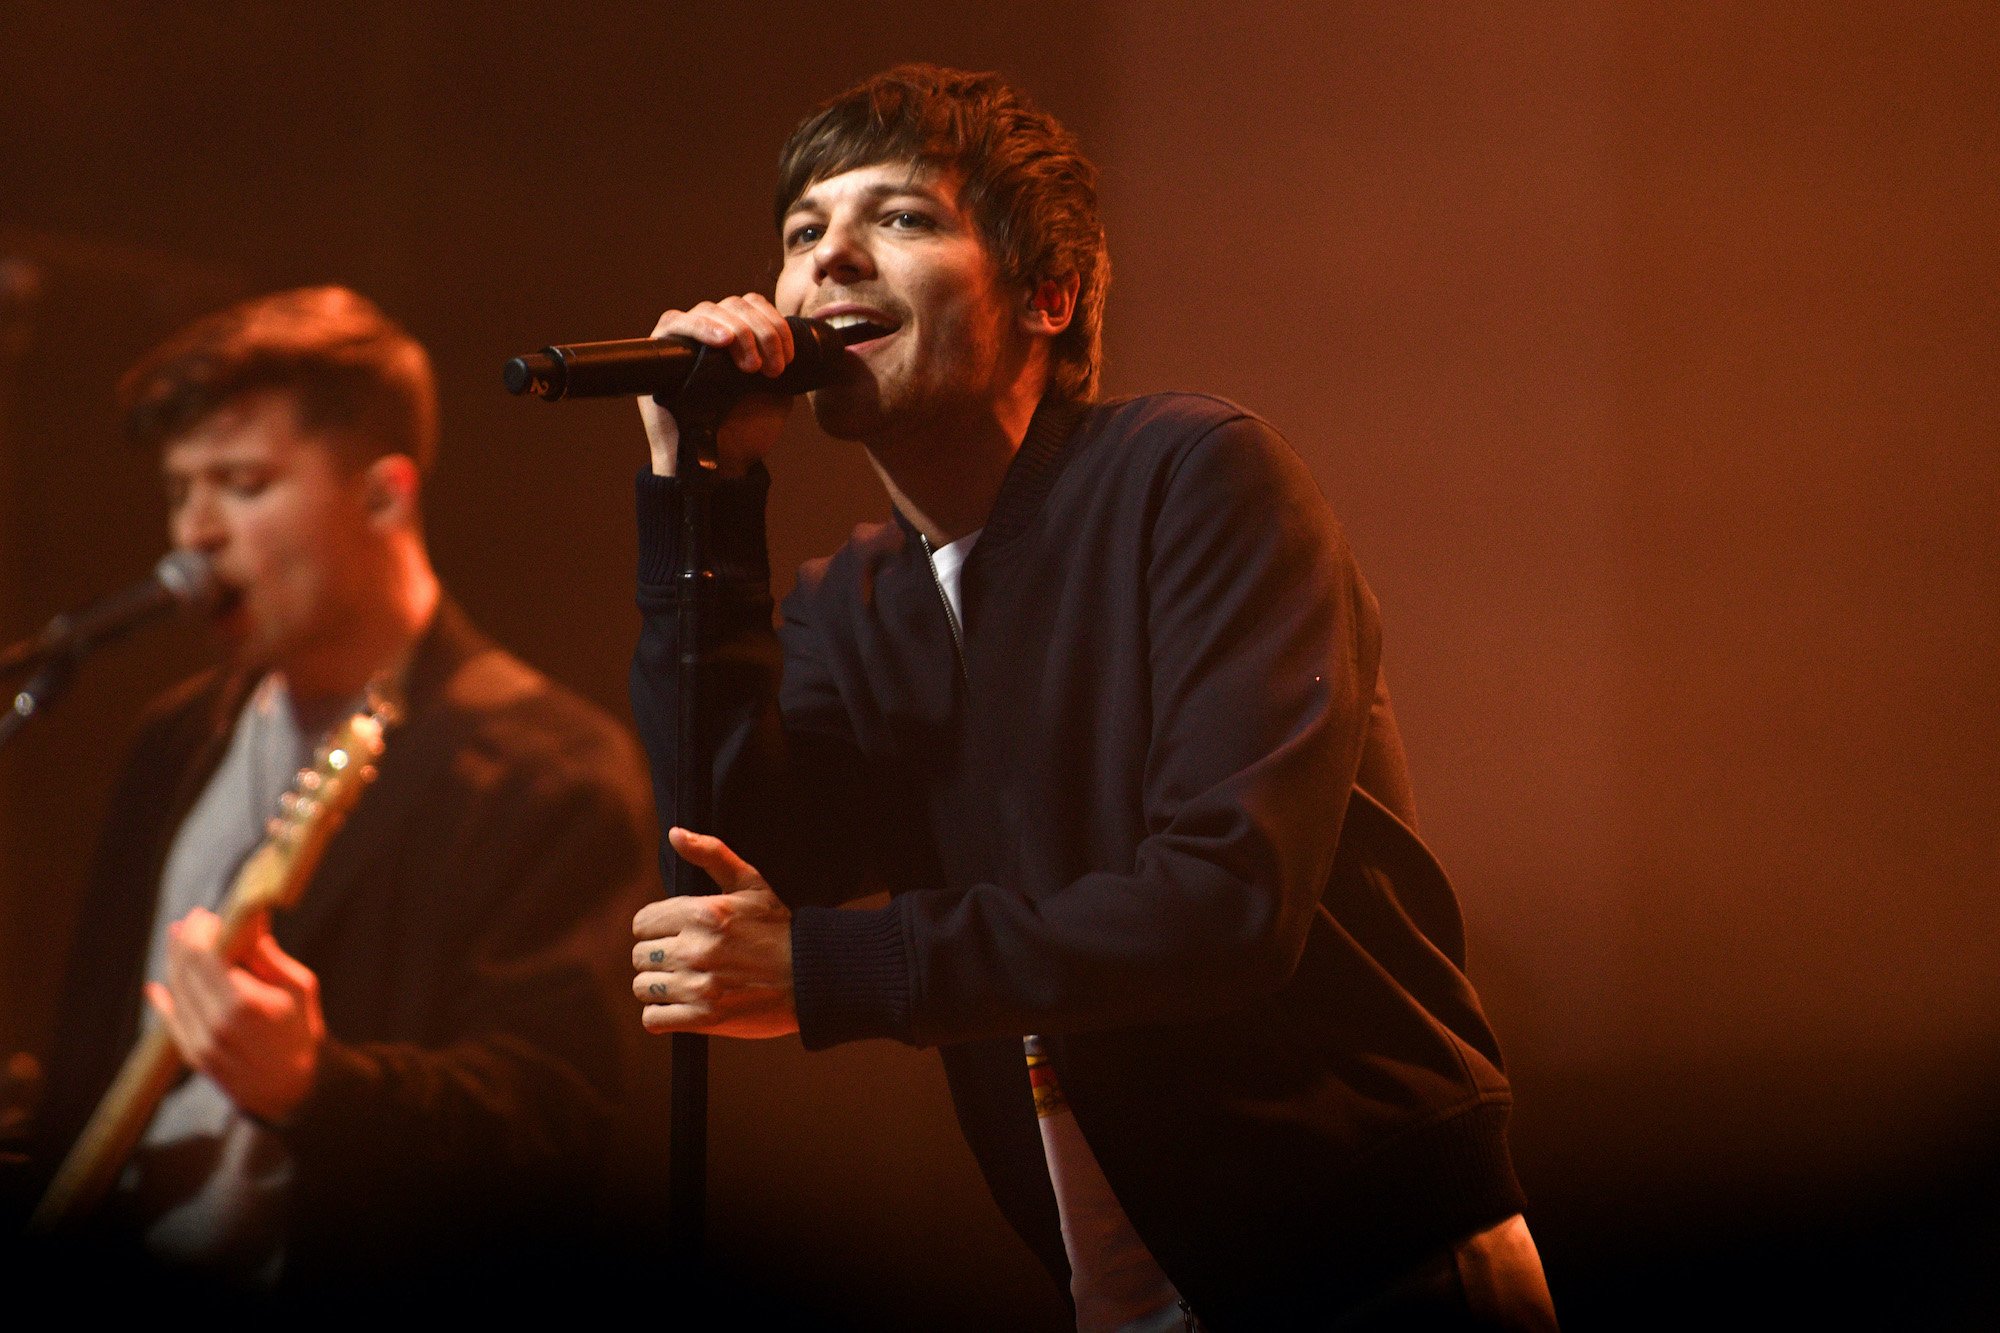 Louis Tomlinson singing into a microphone